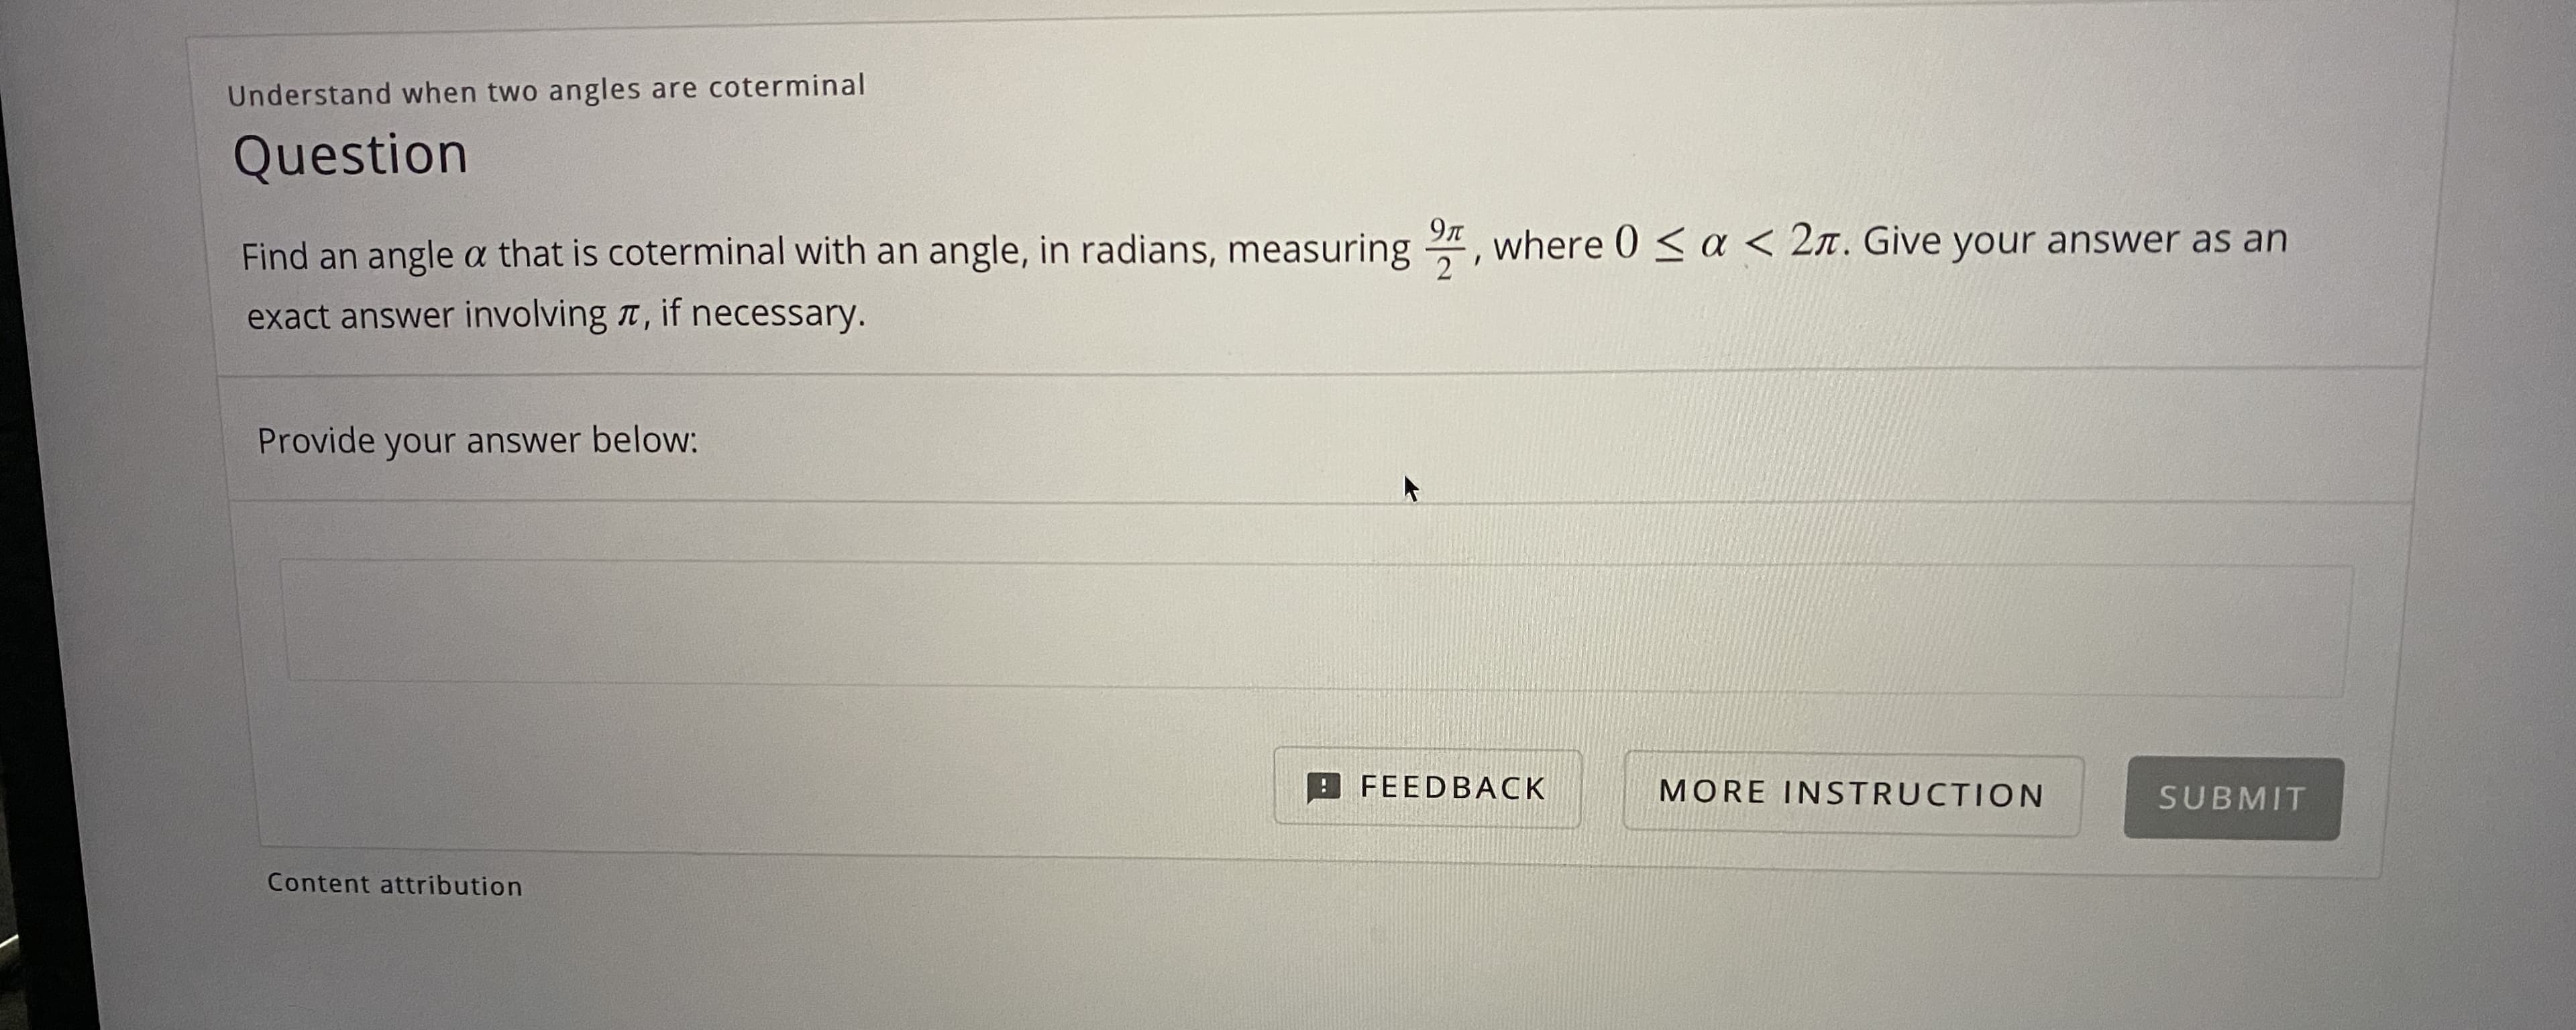 9л
Find an angle a that is coterminal with an angle, in radians, measuring , where 0 <a < 2n. Give your answer as an
2
exact answer involving t, if necessary.
